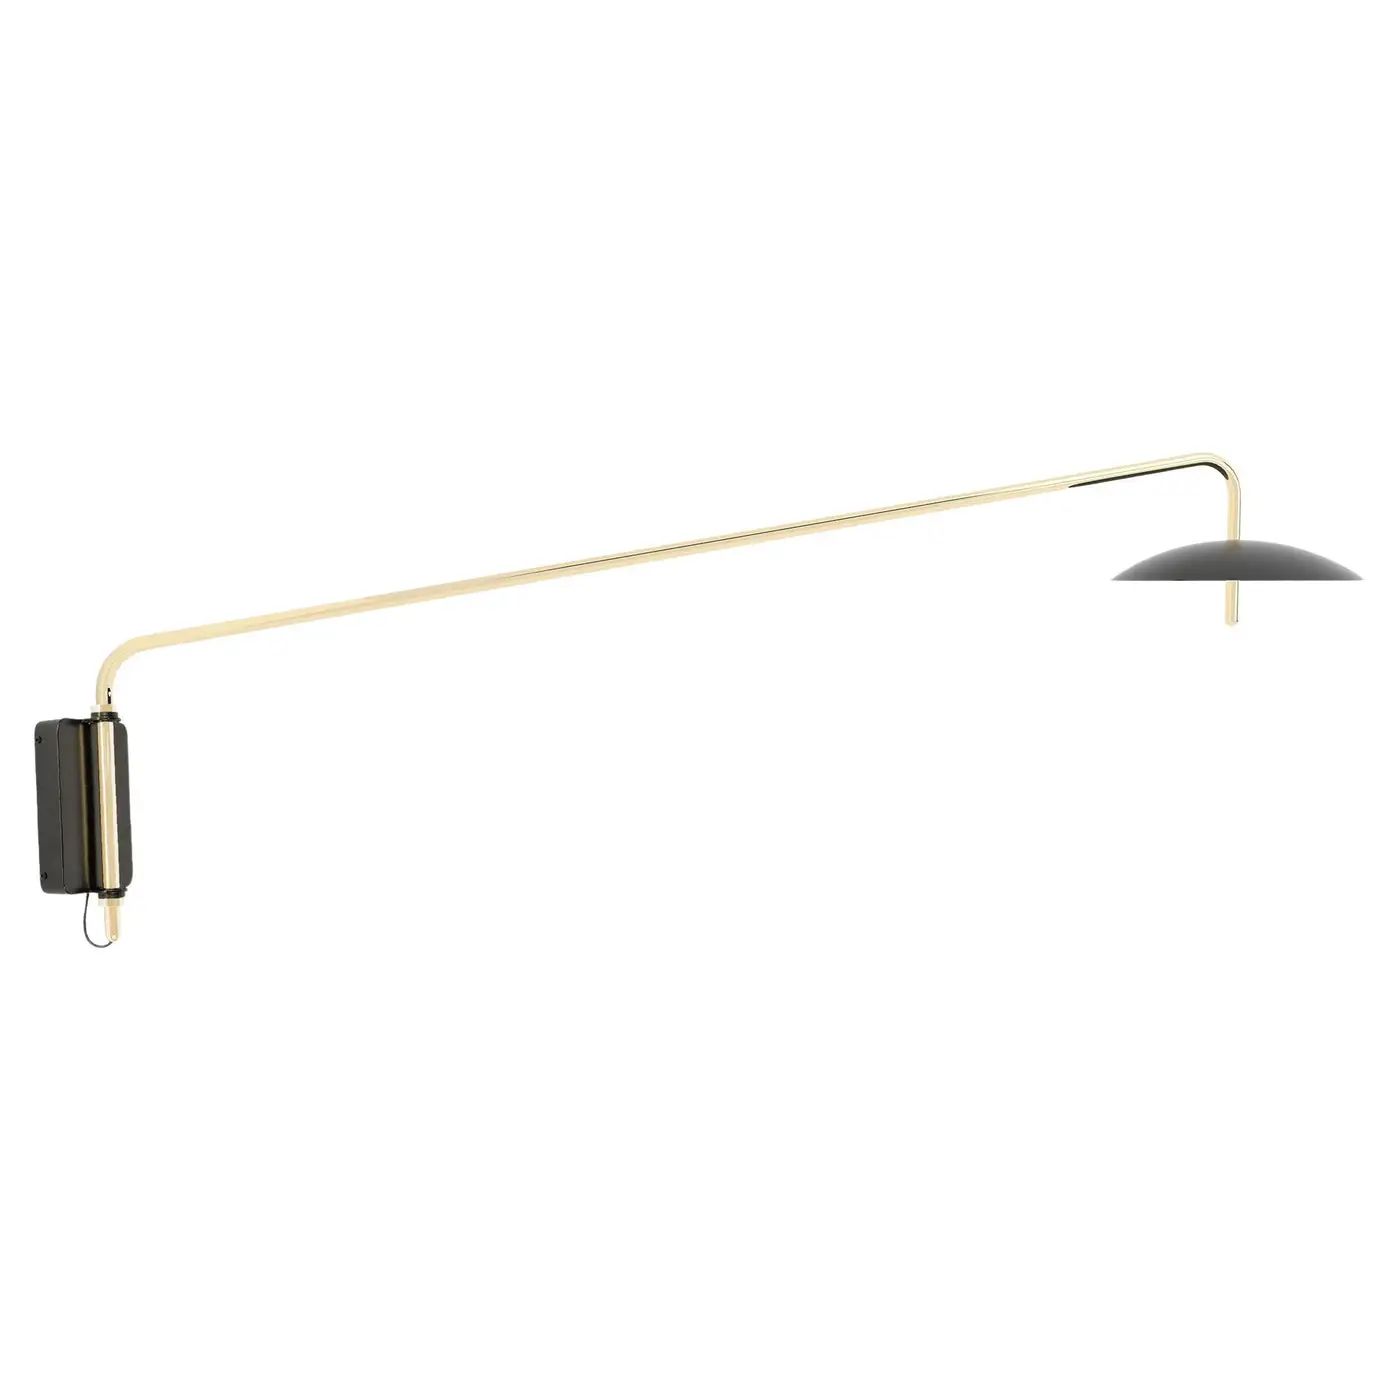 Signal Arm Sconce in Black x Brass, Long, Hardwire, by Souda, Made to Order | 1stDibs